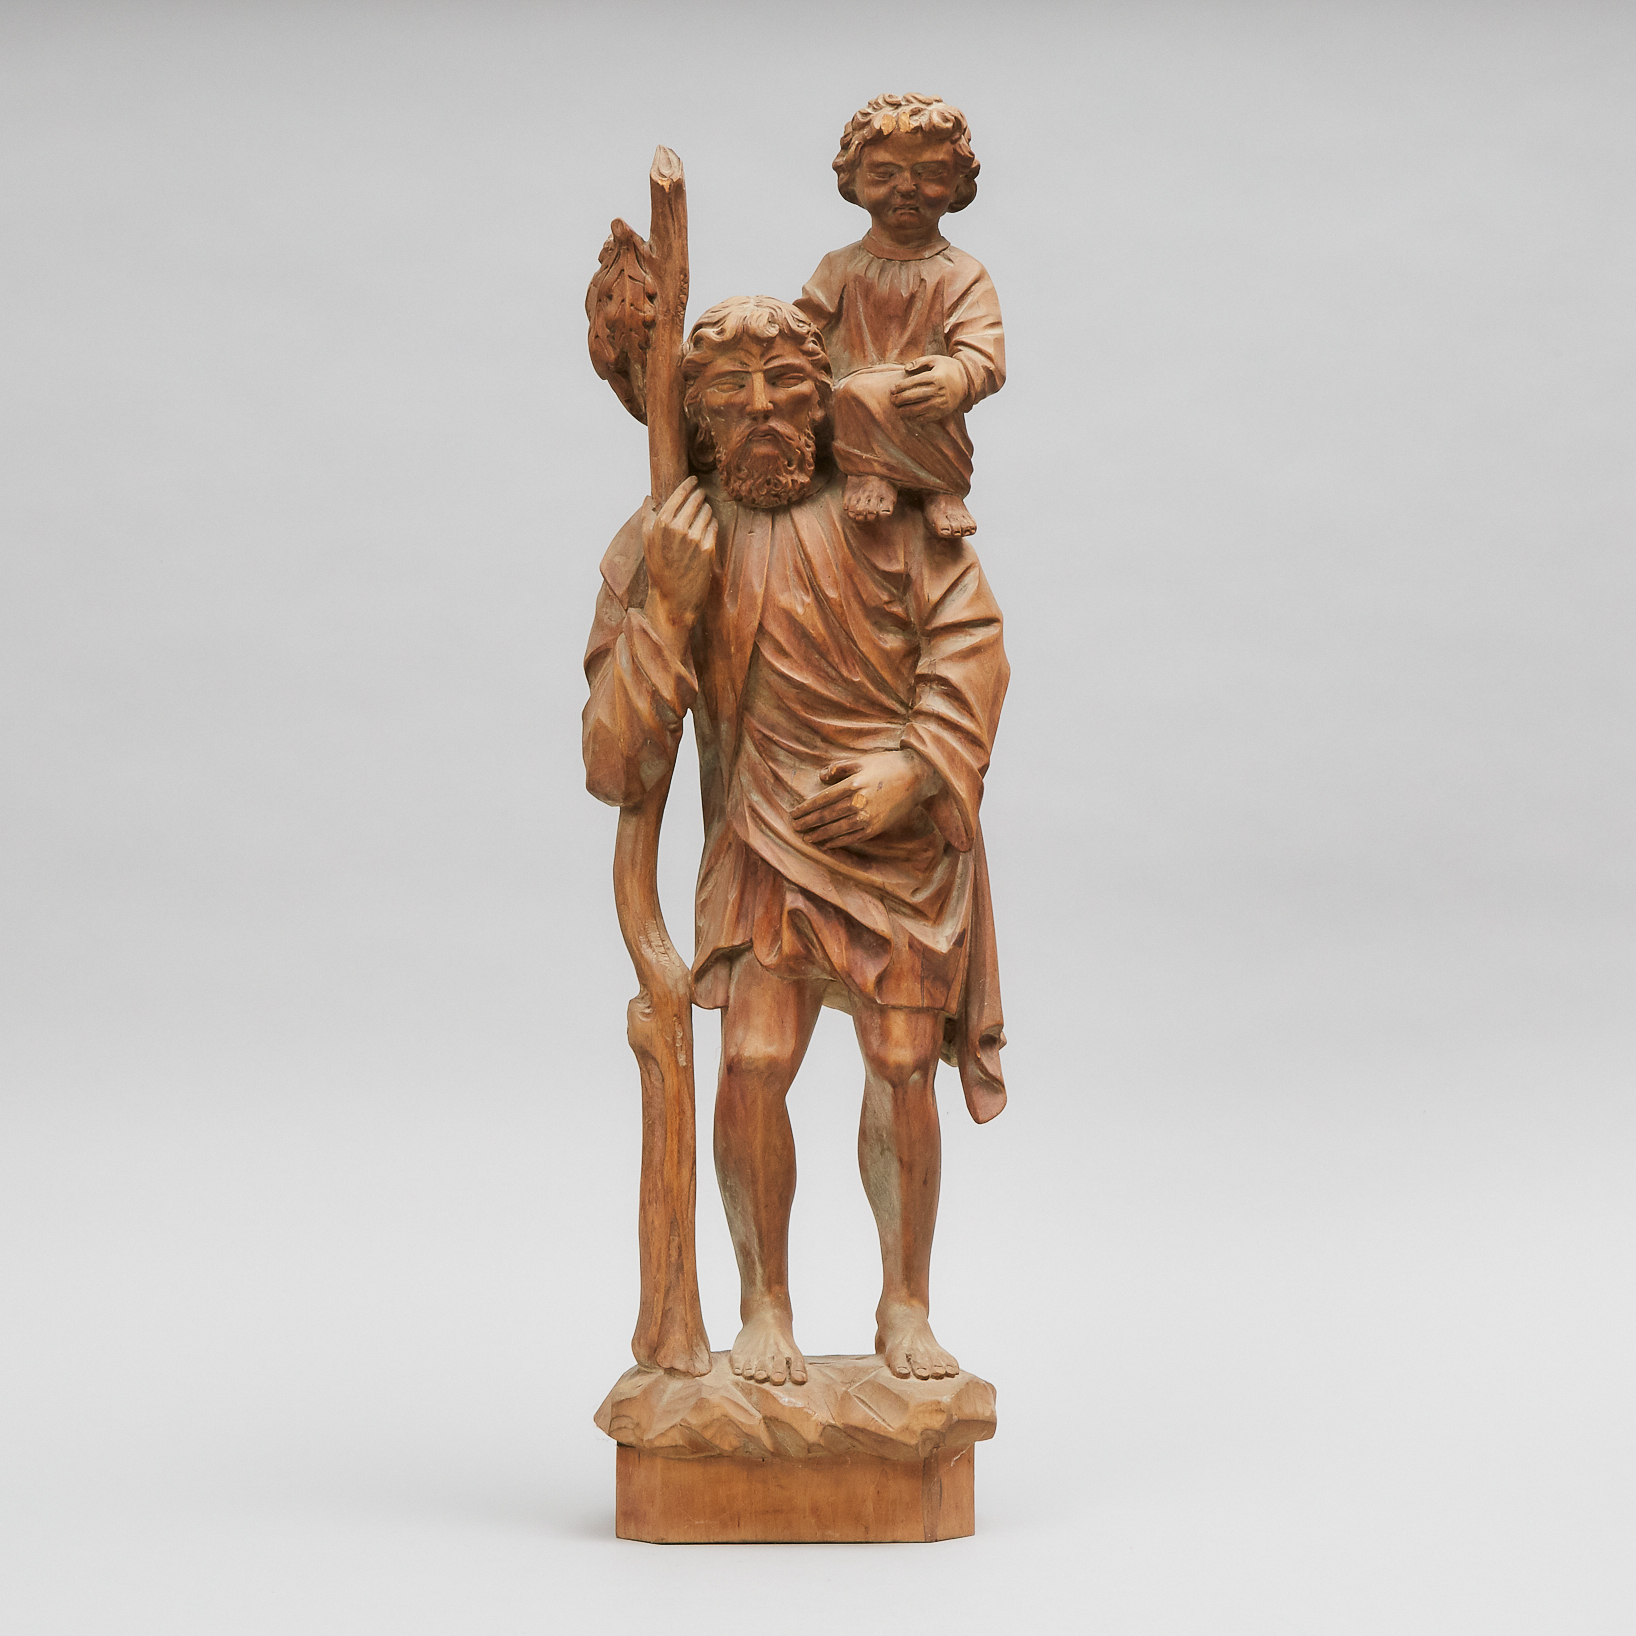 South German Carved Limewood Figure of St. Christopher, early 20th century